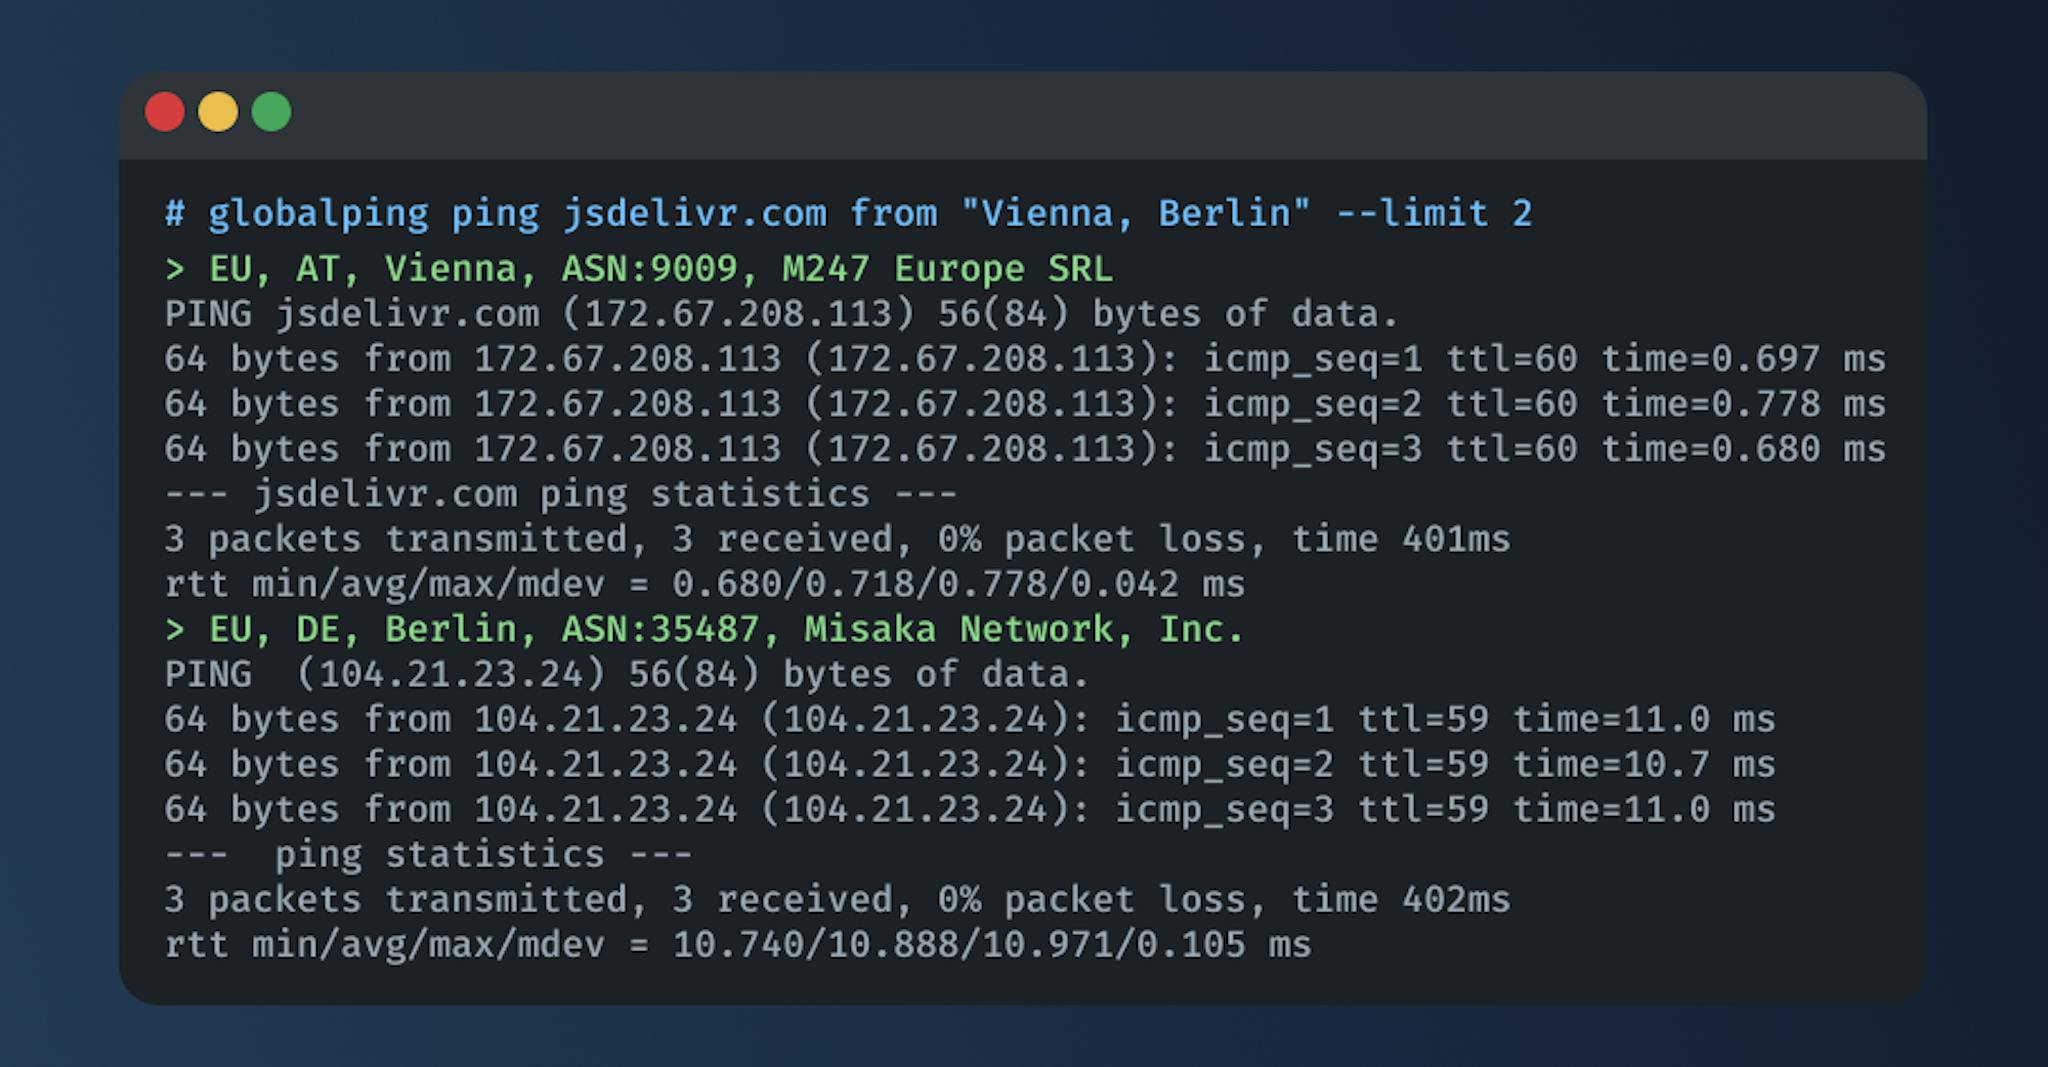 ping from anywhere in the world using Globalping